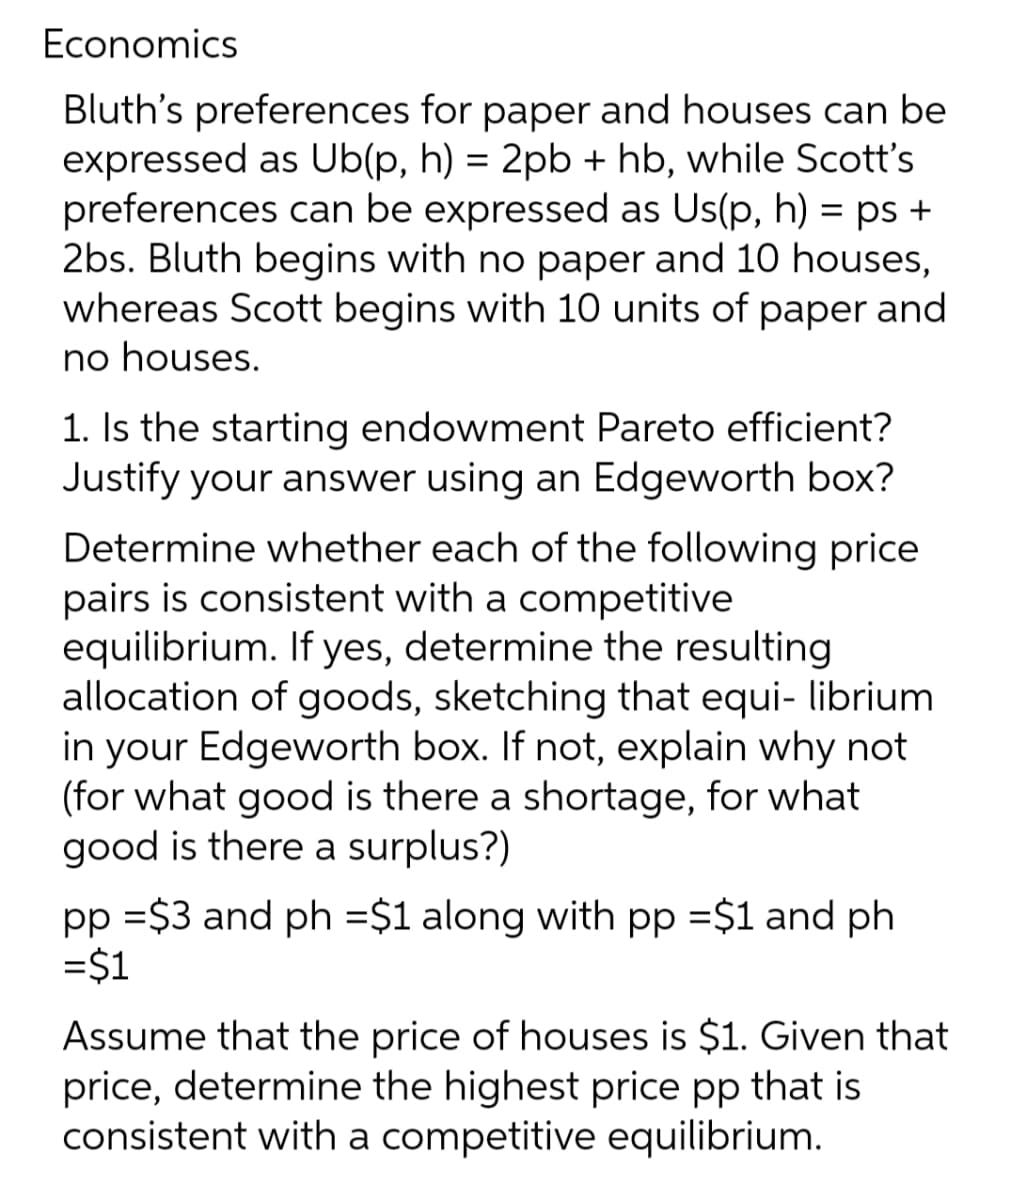 Economics
Bluth's preferences for paper and houses can be
expressed as Ub(p, h) = 2pb + hb, while Scott's
preferences can be expressed as Us(p, h) = ps +
2bs. Bluth begins with no paper and 10 houses,
whereas Scott begins with 10 units of paper and
no houses.
1. Is the starting endowment Pareto efficient?
Justify your answer using an Edgeworth box?
Determine whether each of the following price
pairs is consistent with a competitive
equilibrium. If yes, determine the resulting
allocation of goods, sketching that equi- librium
in your Edgeworth box. If not, explain why not
(for what good is there a shortage, for what
good is there a surplus?)
pp =$3 and ph =$1 along with pp =$1 and ph
=$1
Assume that the price of houses is $1. Given that
price, determine the highest price pp that is
consistent with a competitive equilibrium.